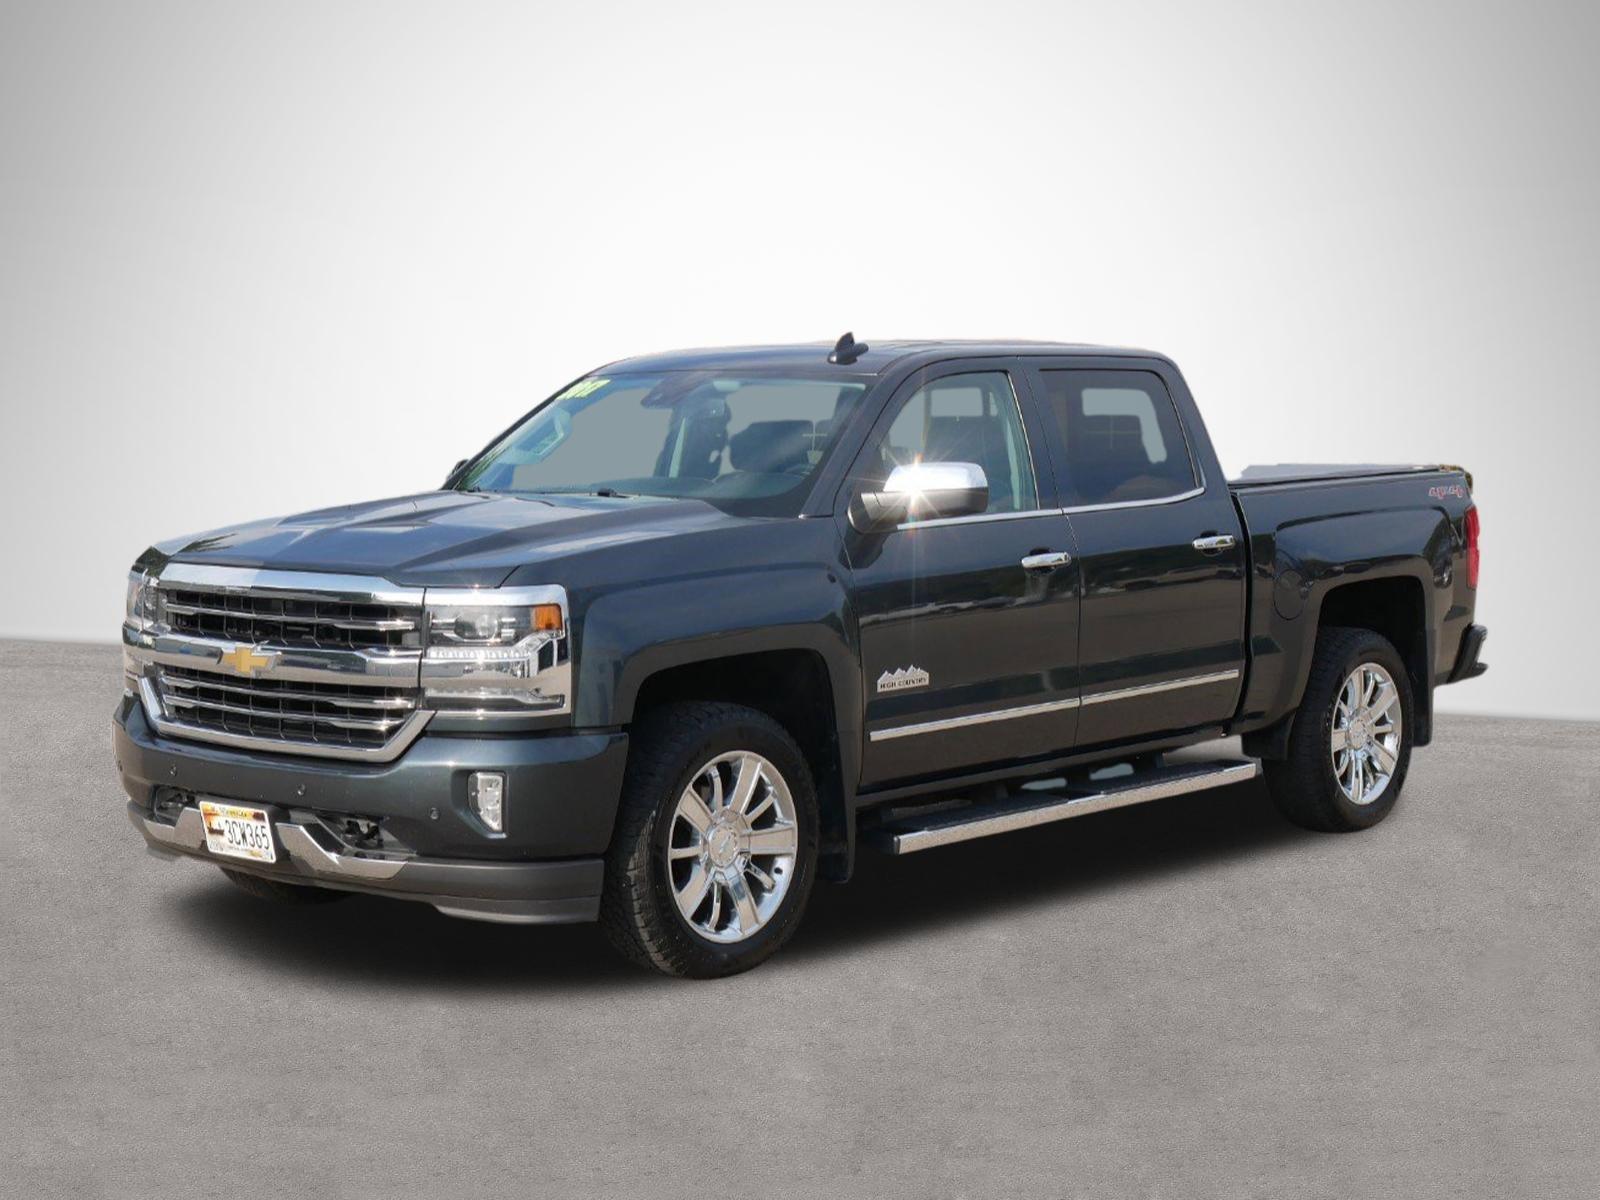 Used 2017 Chevrolet Silverado 1500 High Country with VIN 3GCUKTEJ2HG465739 for sale in Owatonna, Minnesota